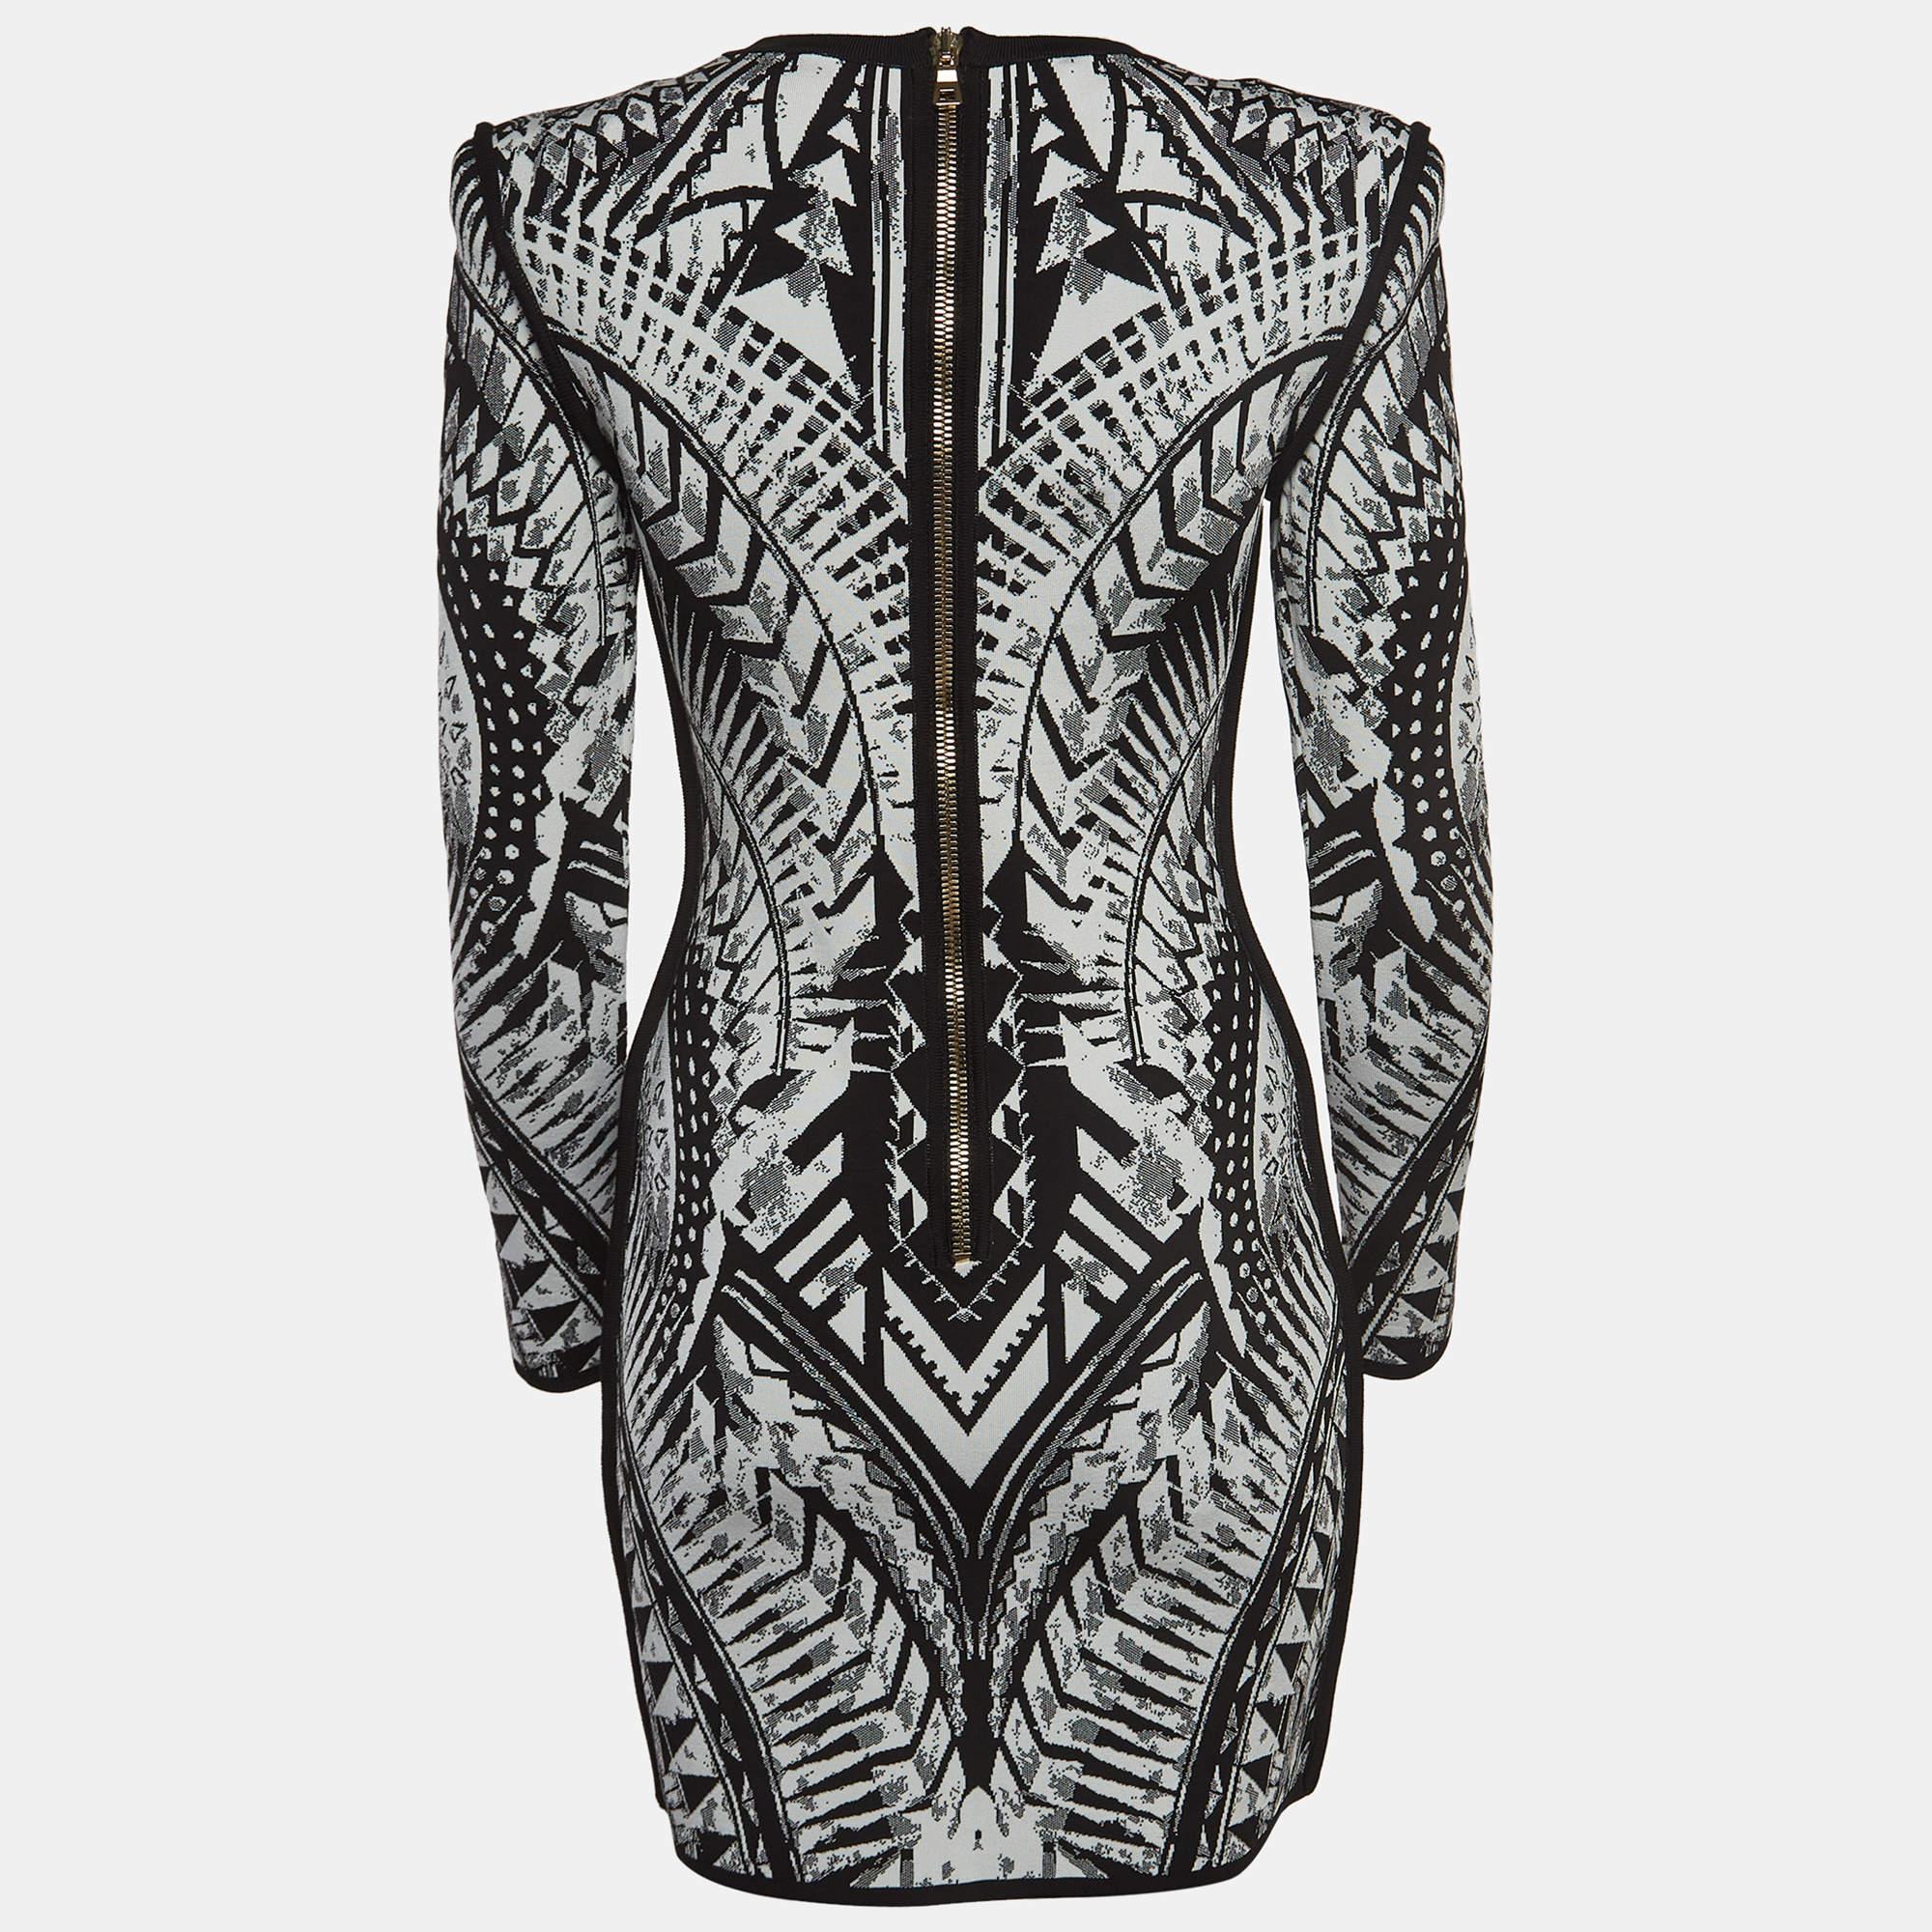 The Balmain bodycon dress exudes sophistication with its intricately woven jacquard pattern. The form-fitting silhouette accentuates curves, while the monochromatic palette adds a timeless elegance to this mini dress, perfect for upscale events and